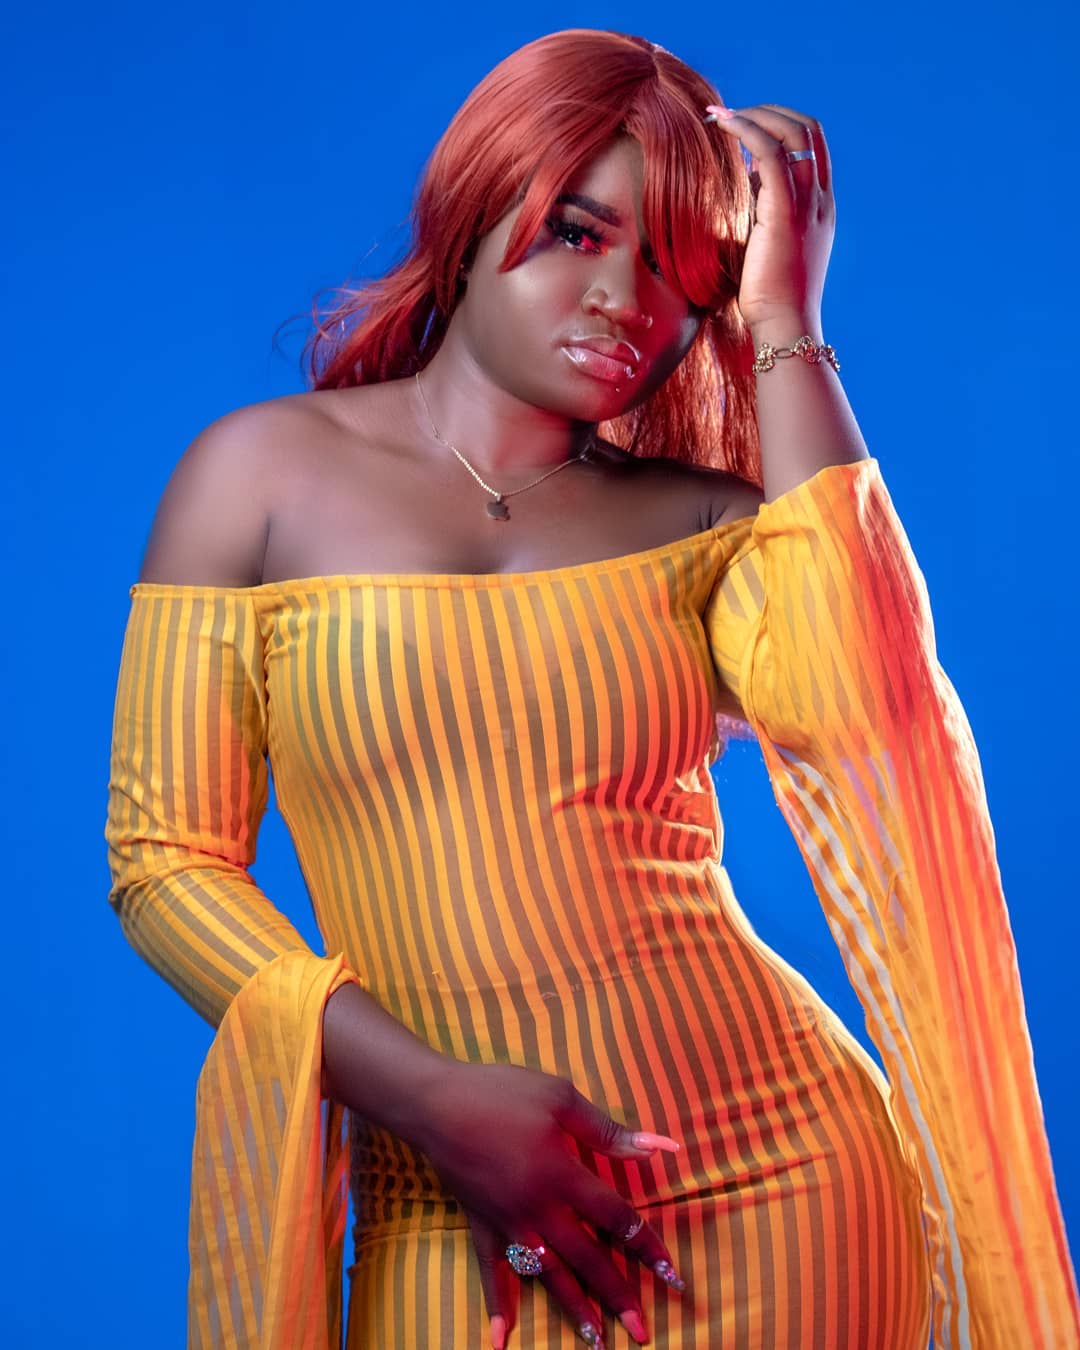 Top 10 Upcoming Cameroonian artists to watch in 2021 - Liya